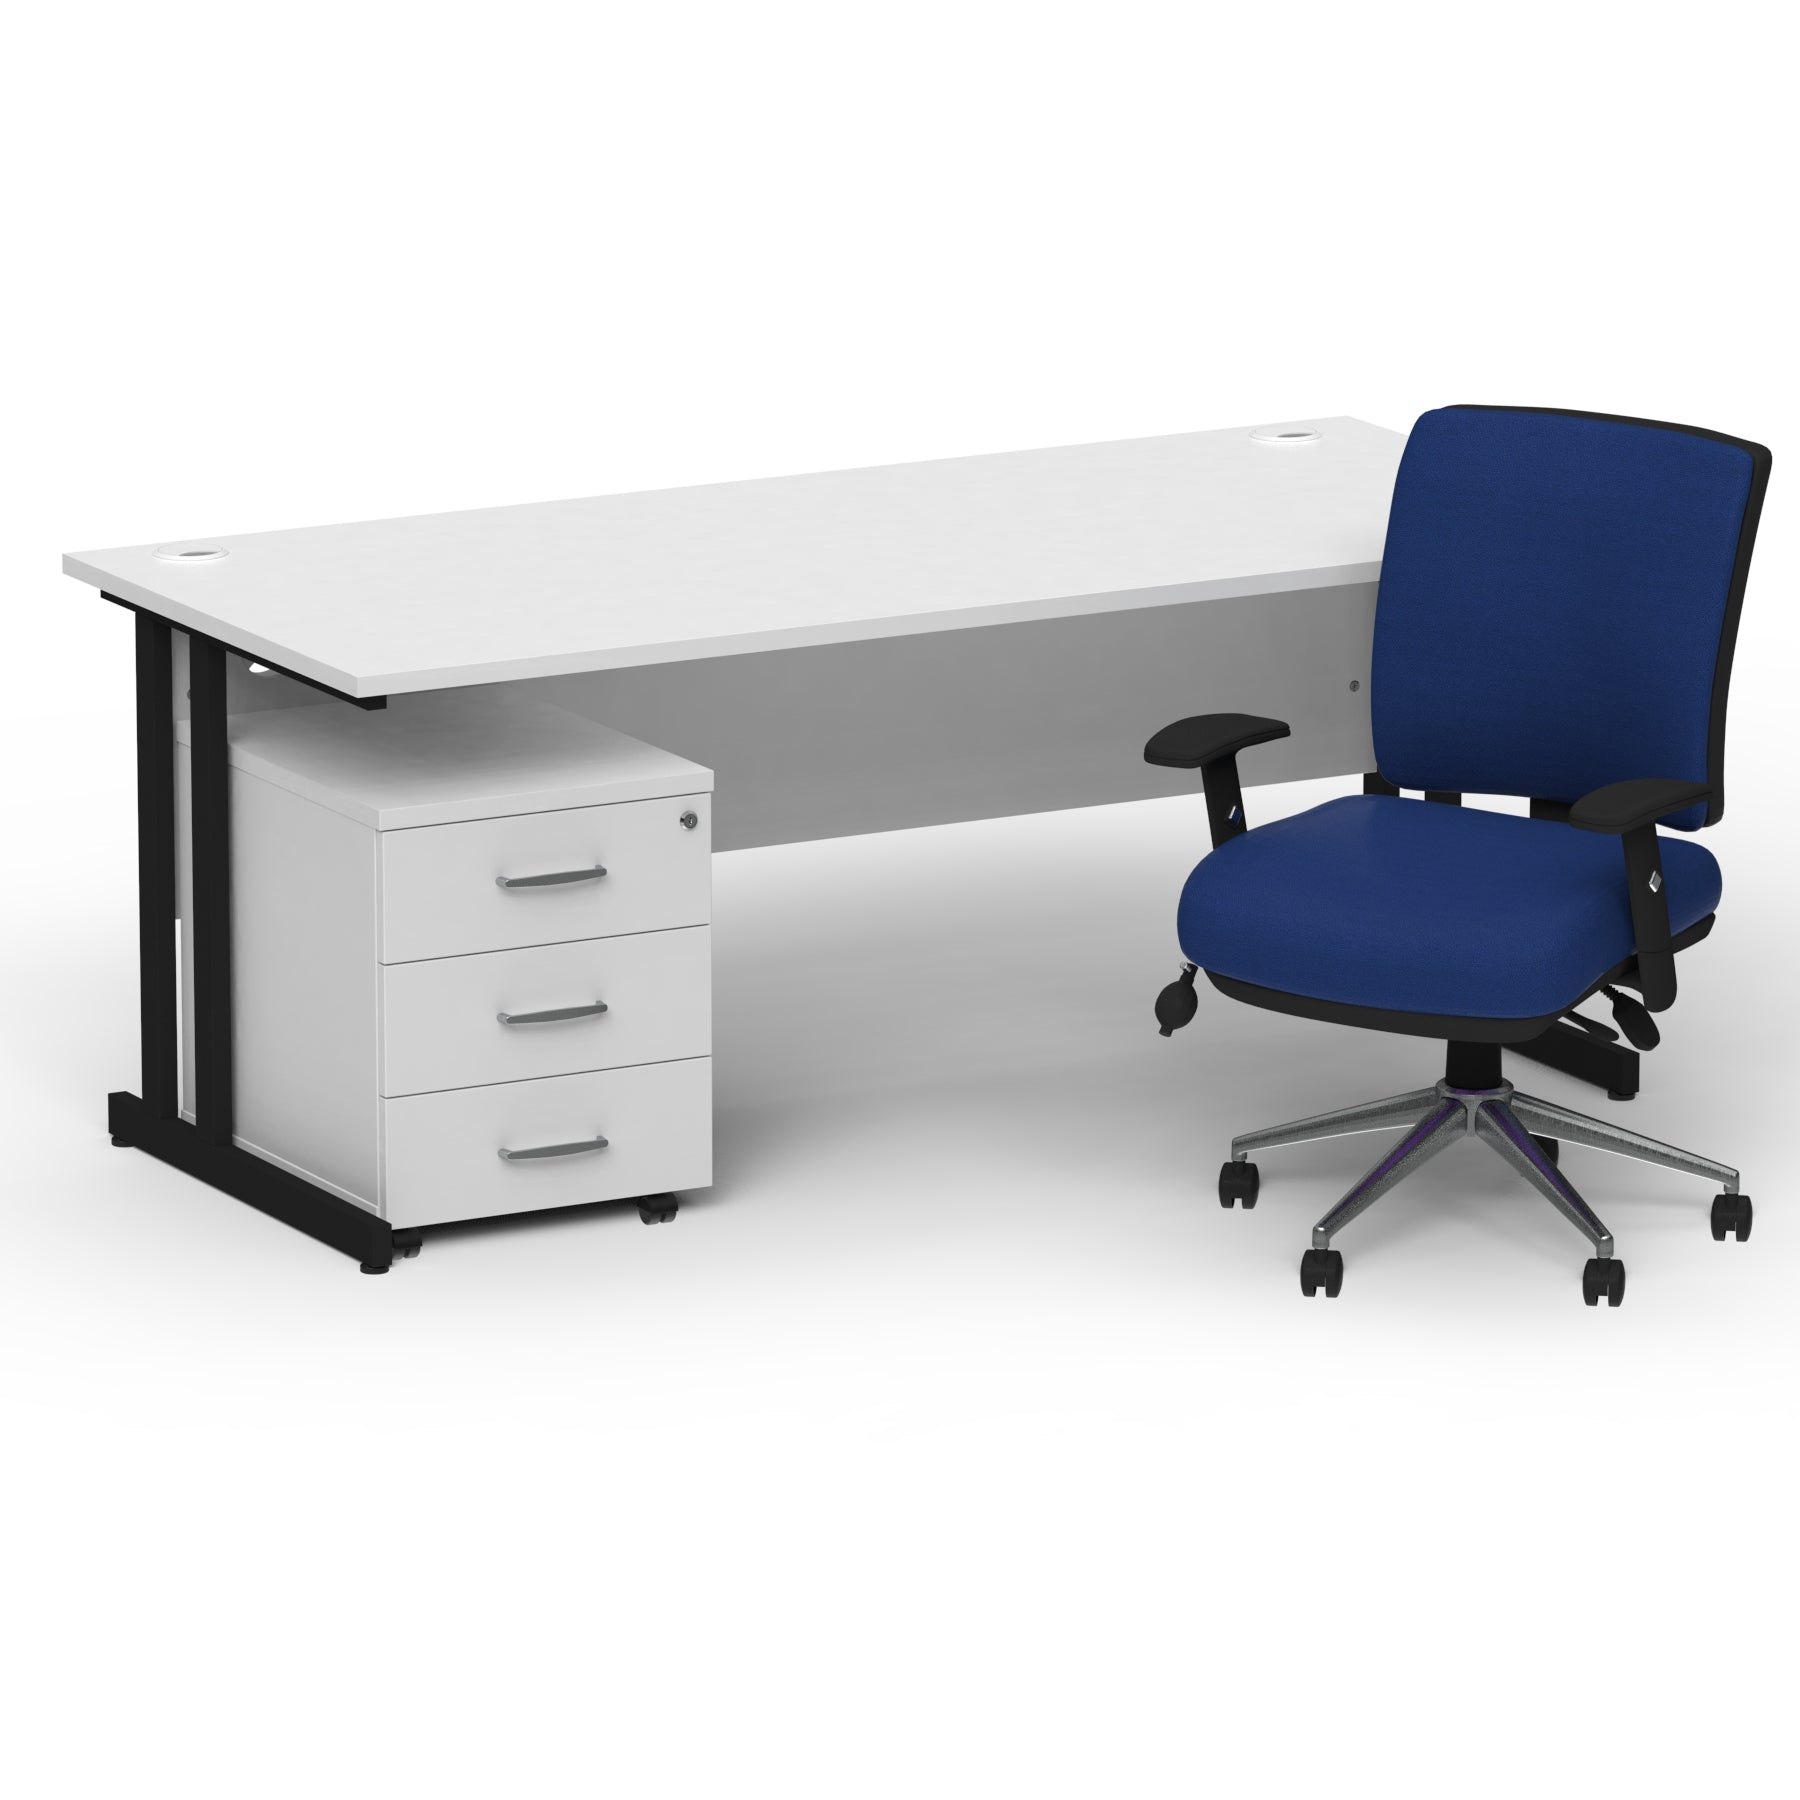 Impulse 1600mm Cantilever Straight Desk With Mobile Pedestal and Chiro Medium Back Blue Operator Chair